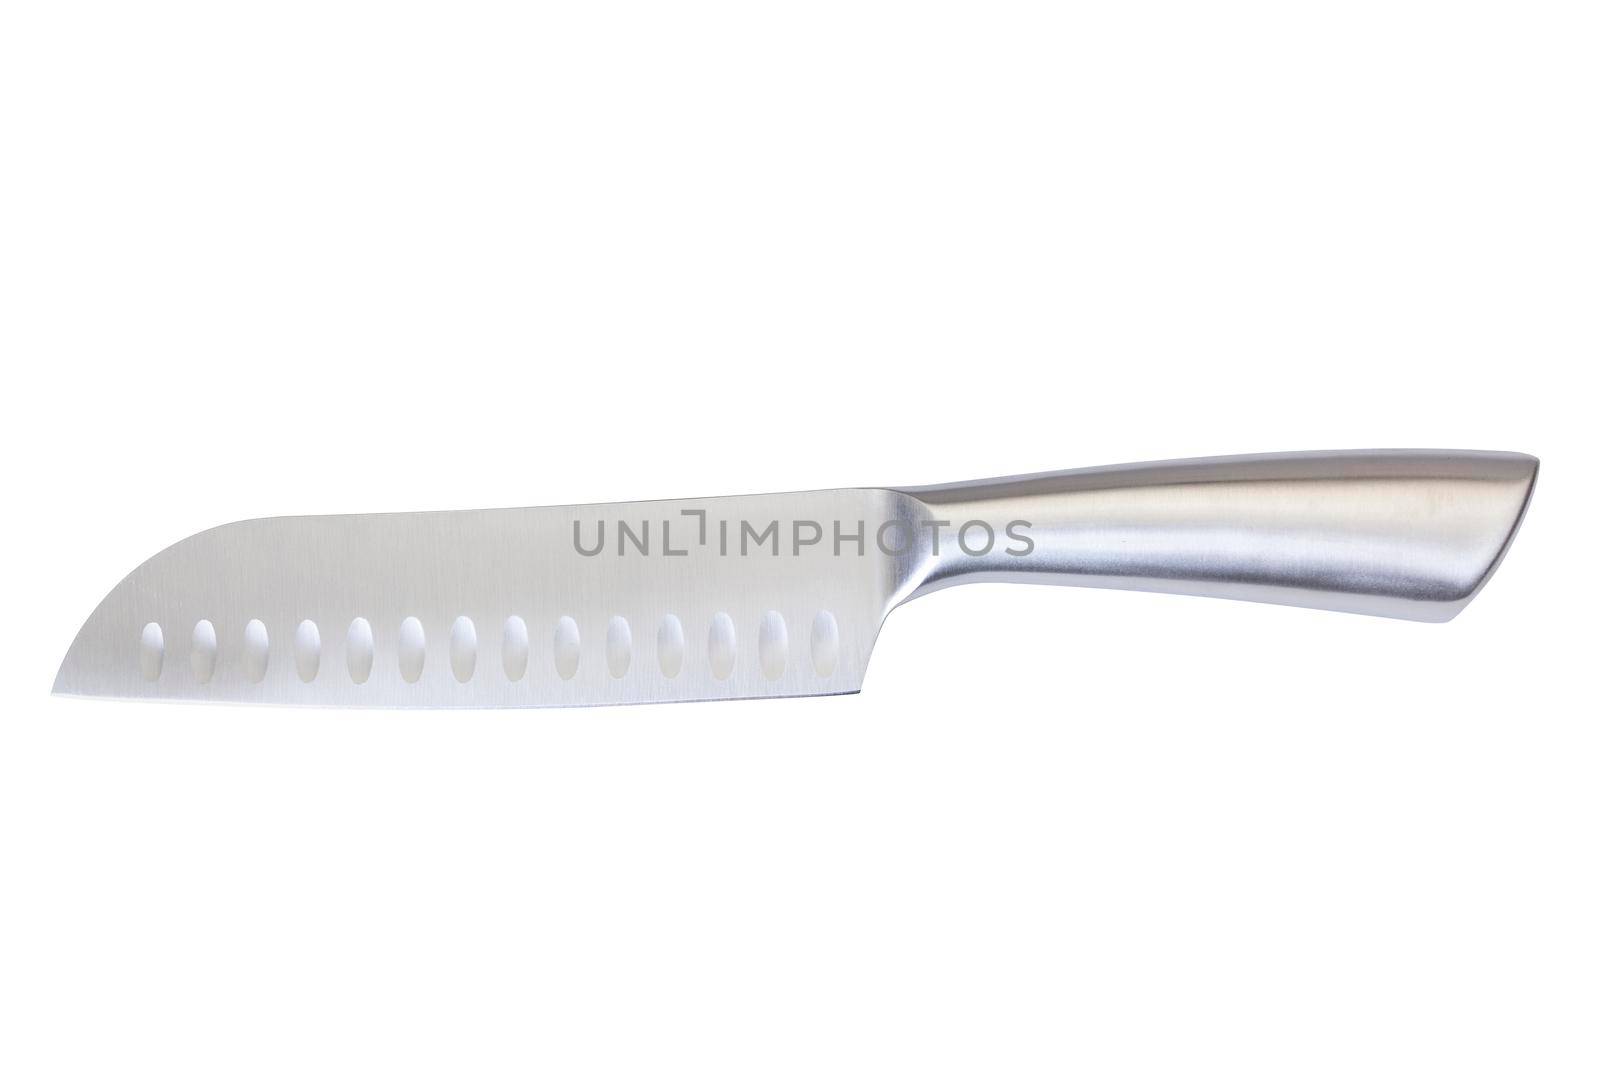 High-quality stainless steel Santoku chef's knife by vdimage